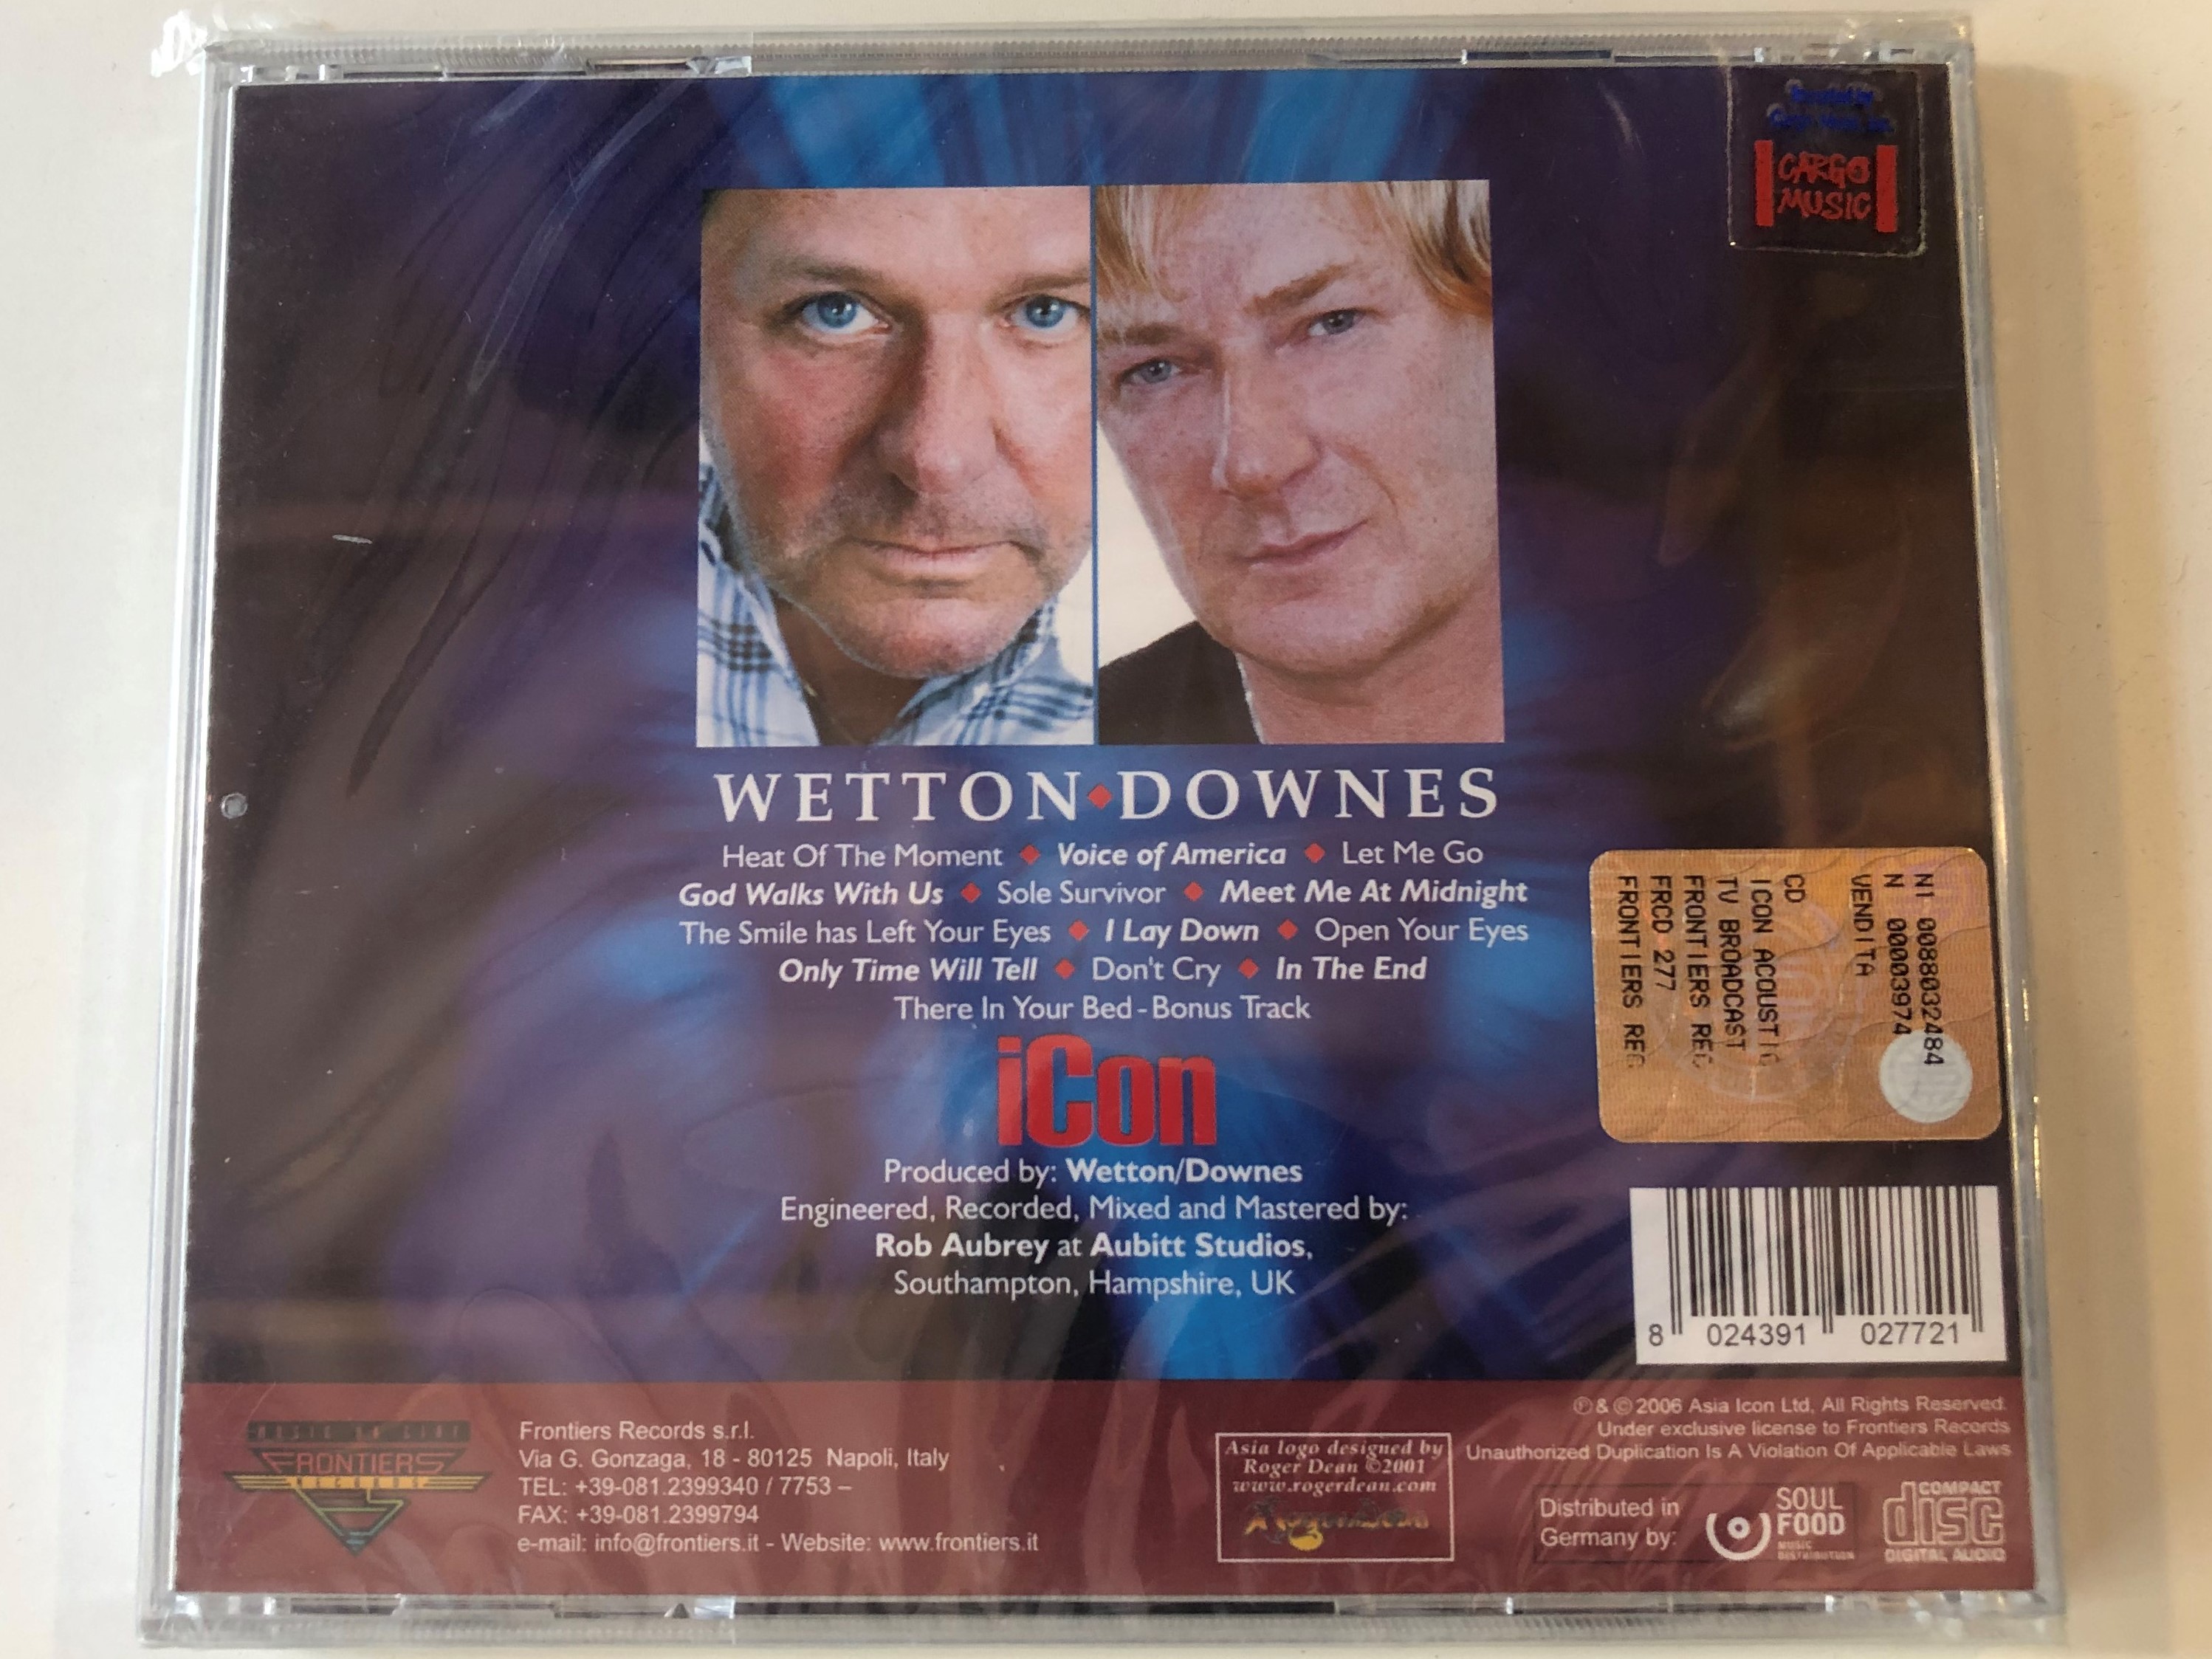 john-wetton-geoffrey-downes-icon-acoustic-tv-broadcast-legendary-members-of-the-british-supergroup-includes-acoustic-versions-of-asia-and-icon-classics-frontiers-records-audio-cd-200.jpg